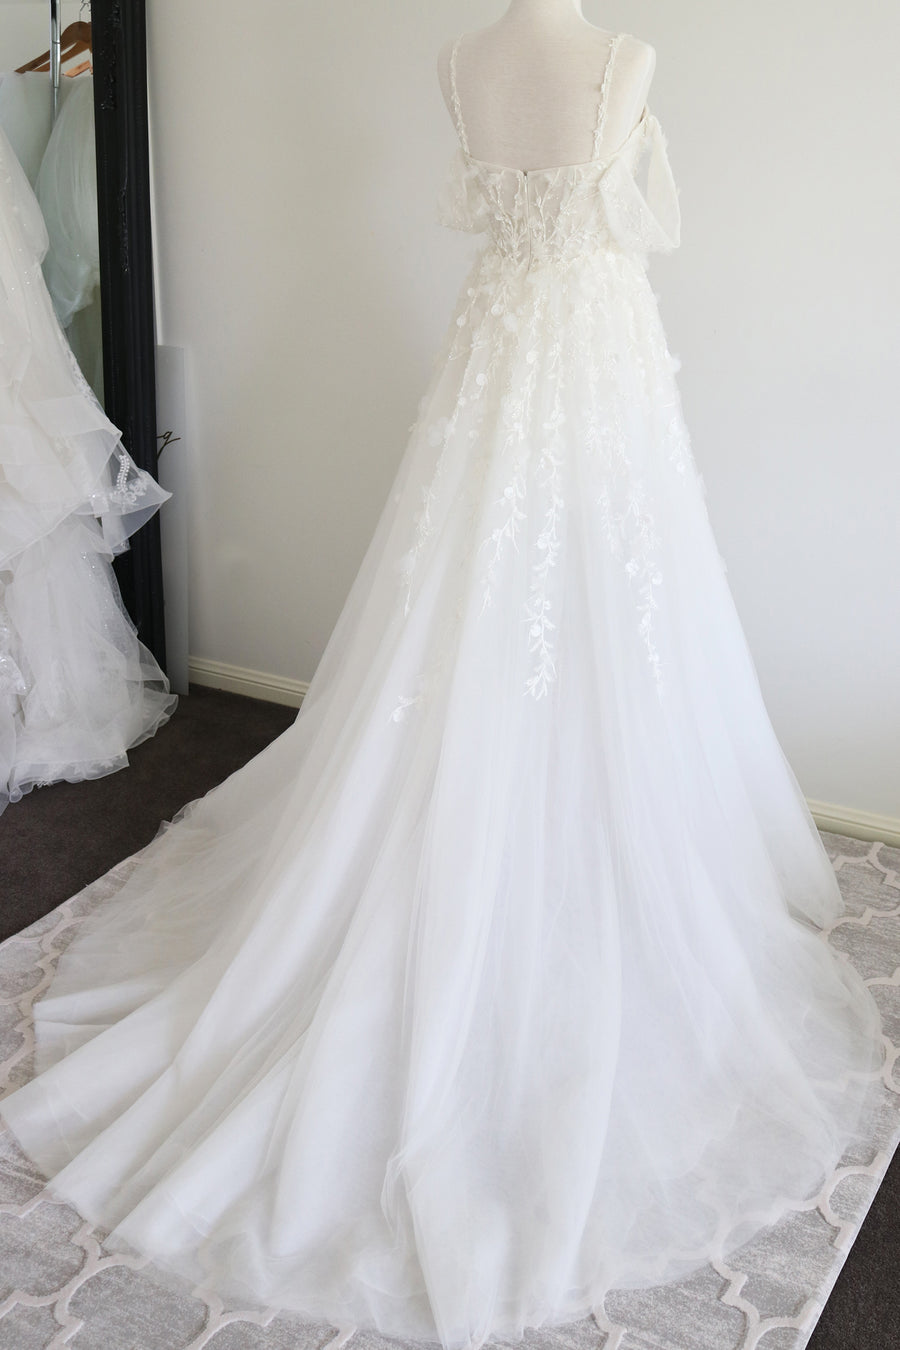 Sylvie A-line wedding dress with removable sleeves